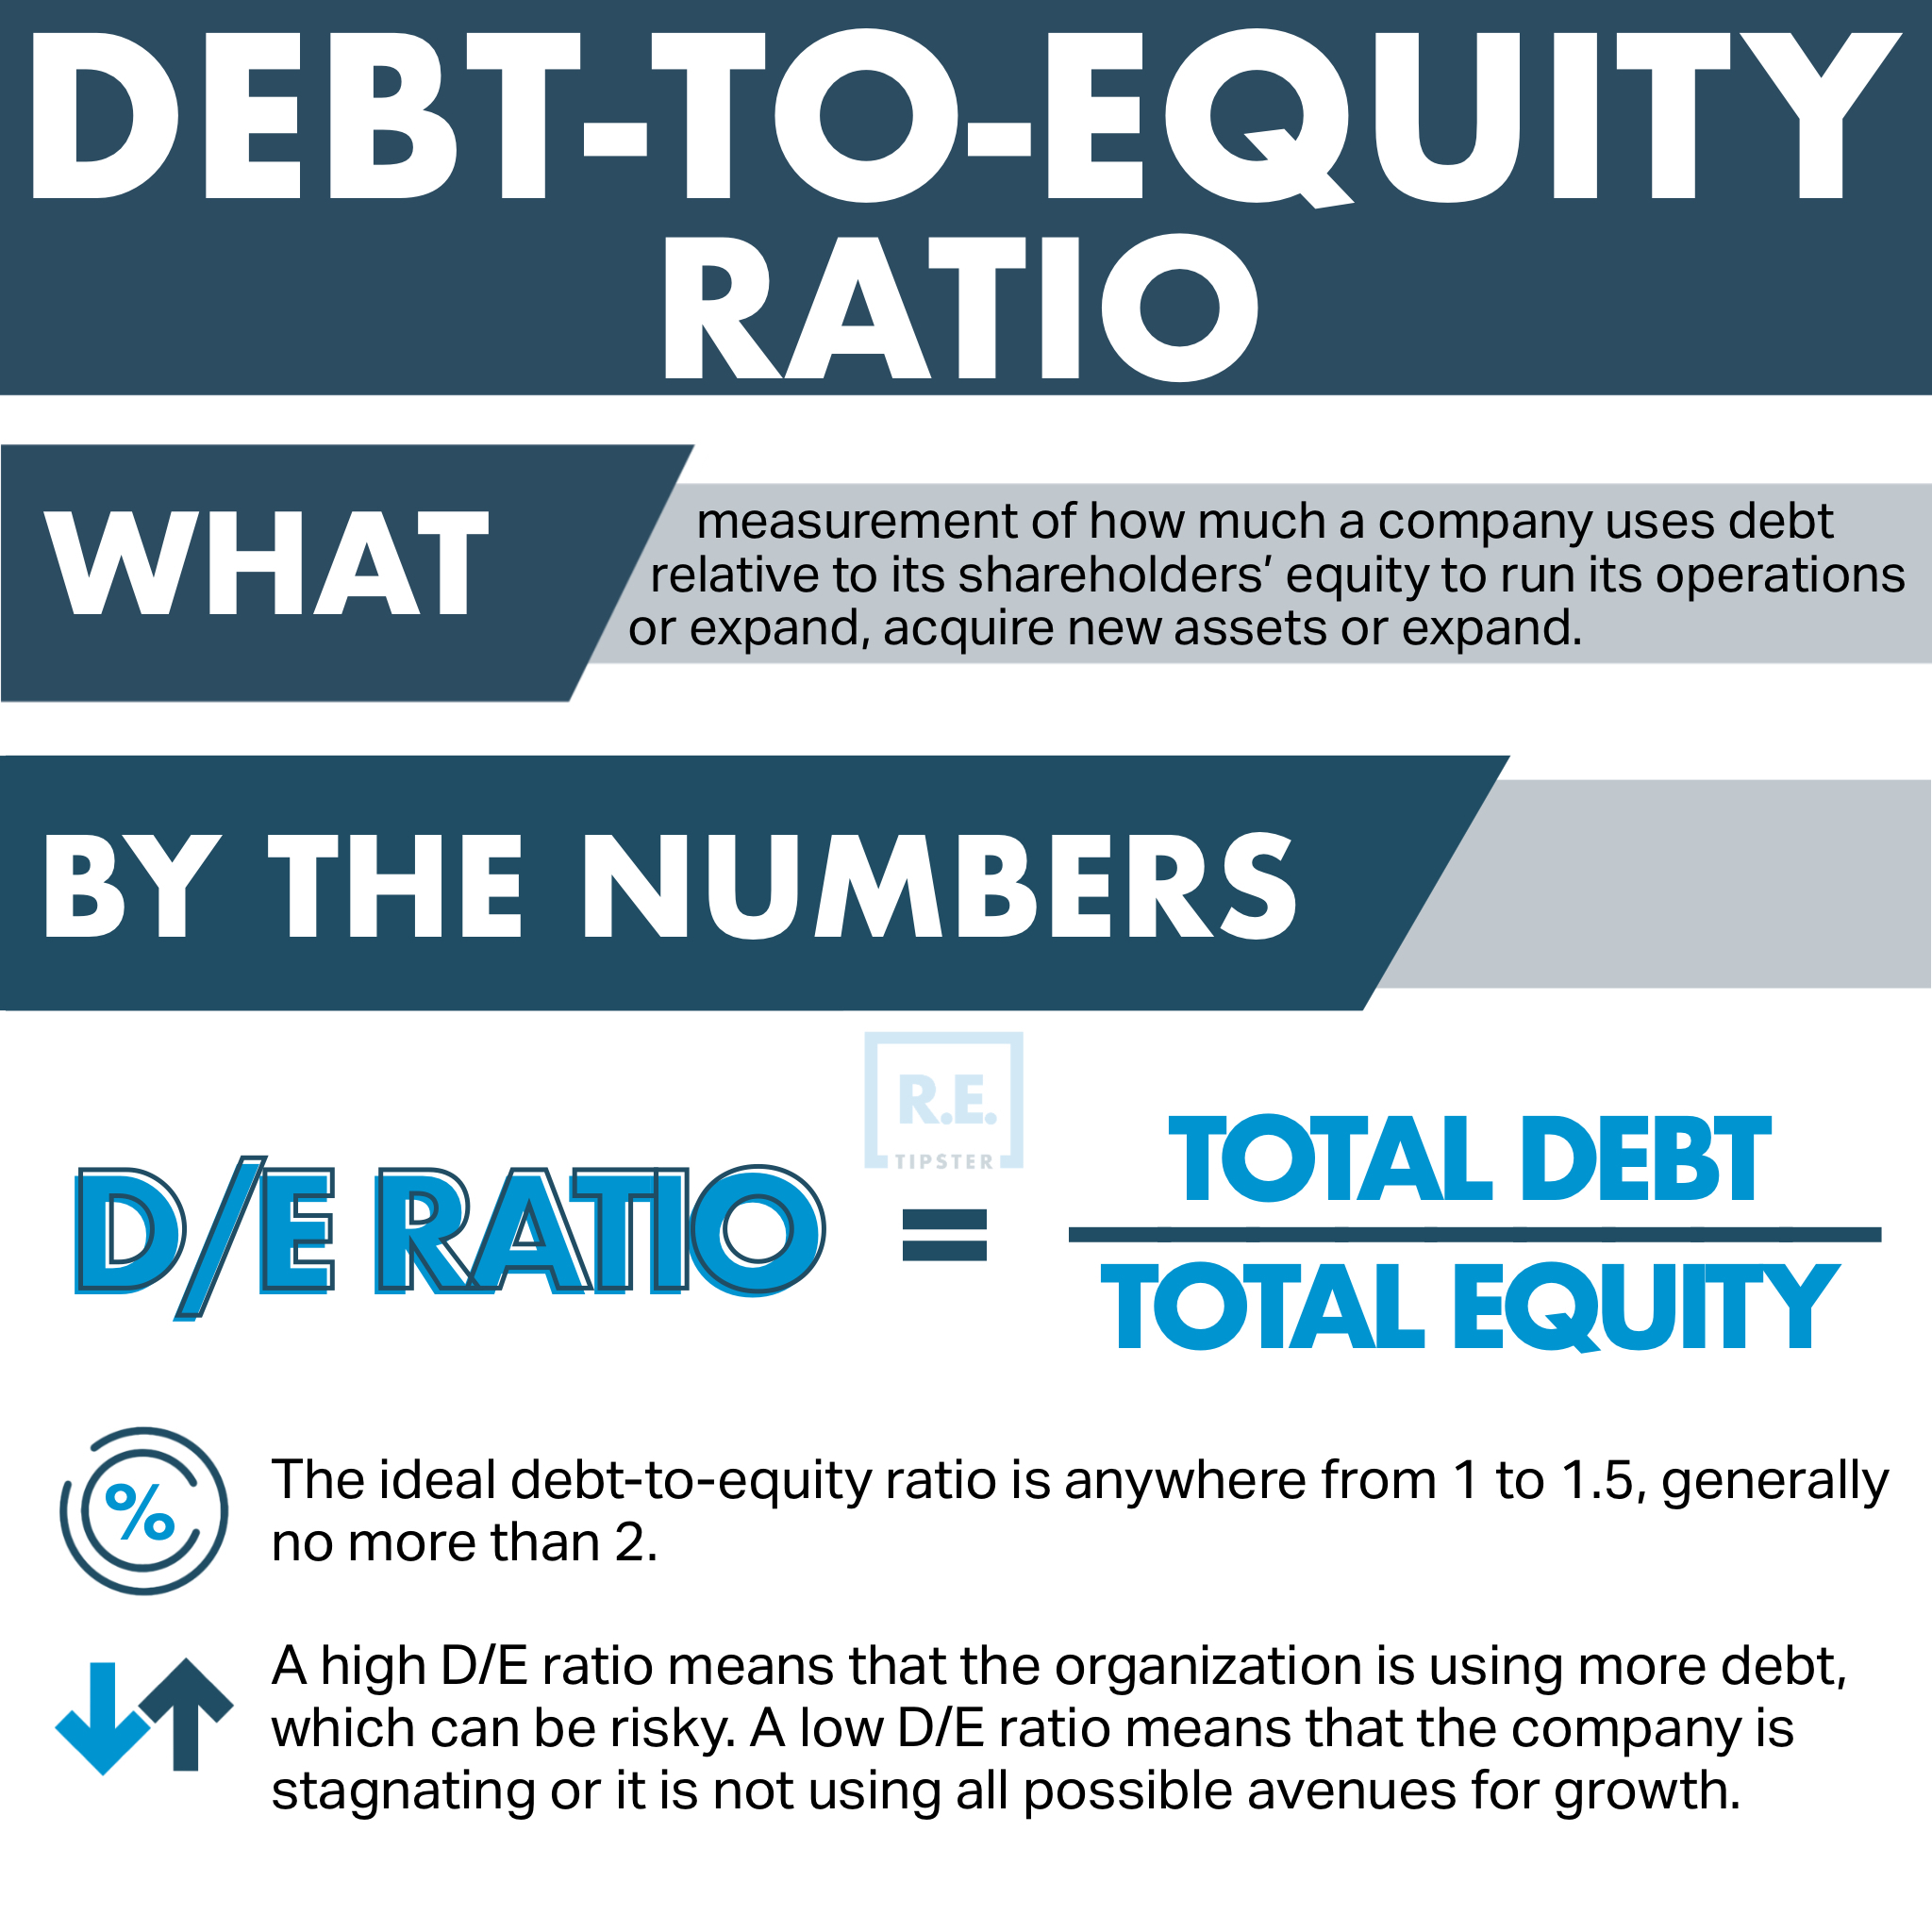 debt-to-equity ratio infographic